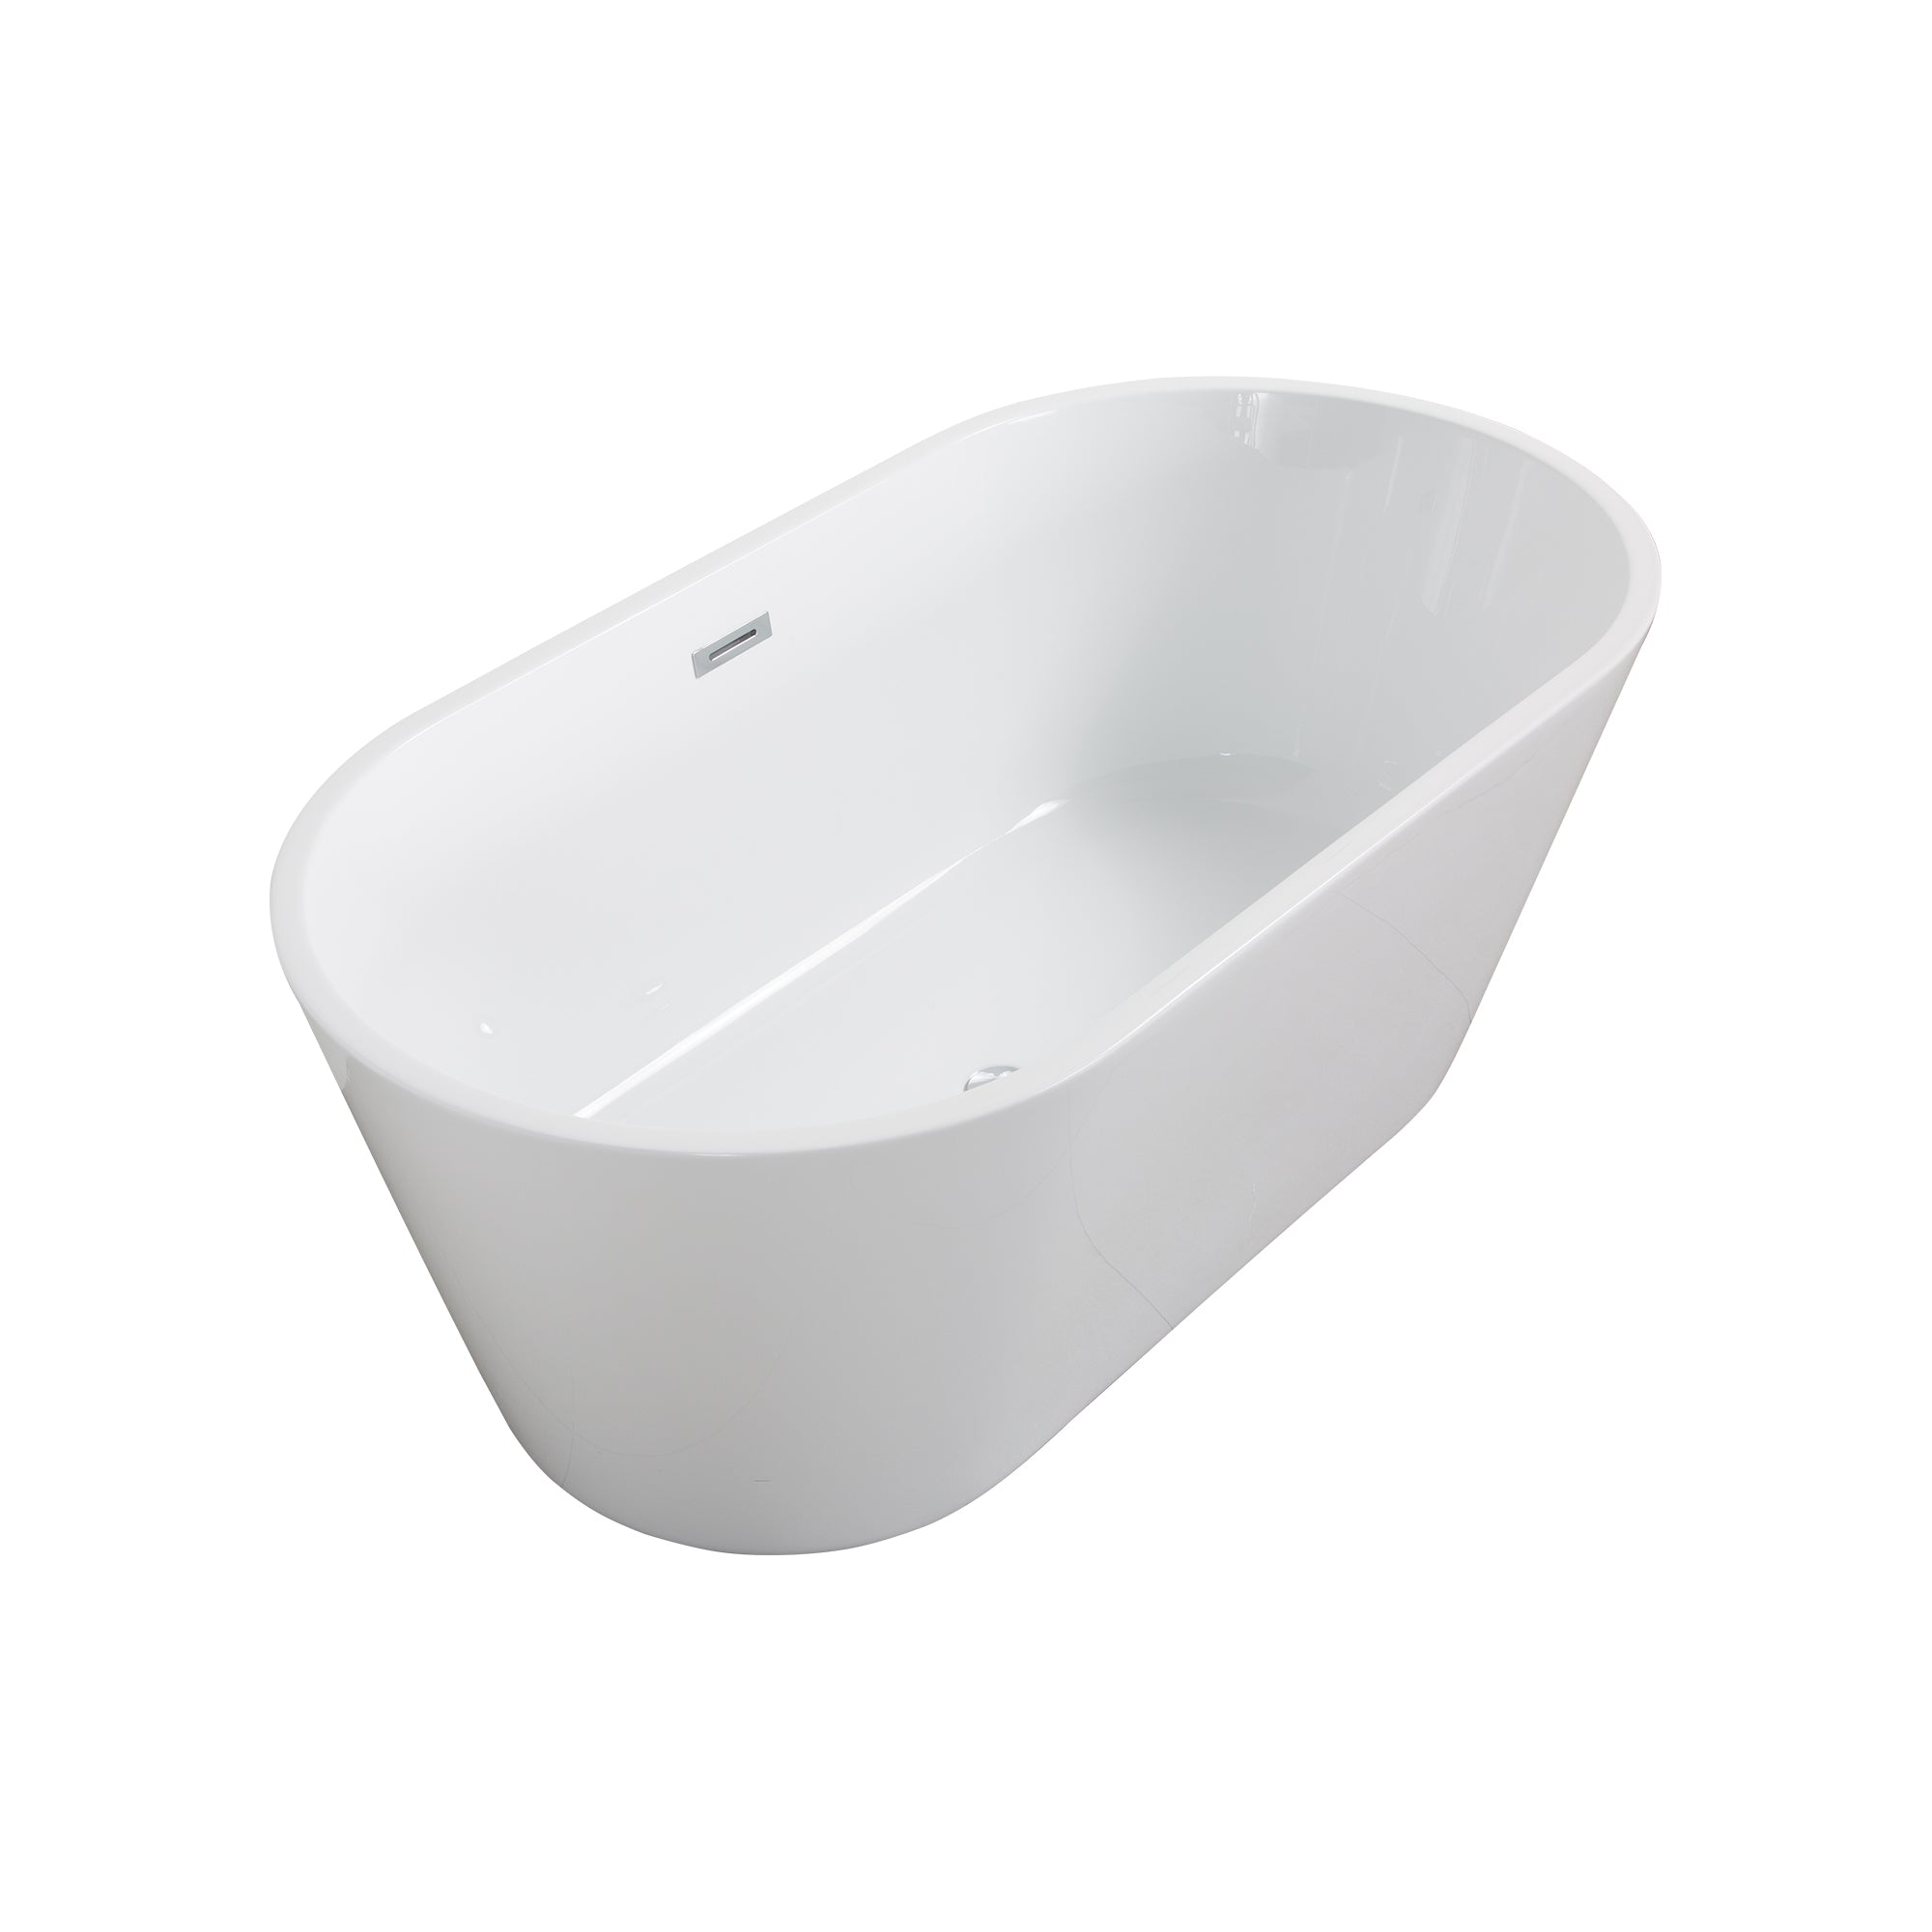 55" Oval Acrylic Freestanding Soaking Bathtub with Overflow RX-A01-55